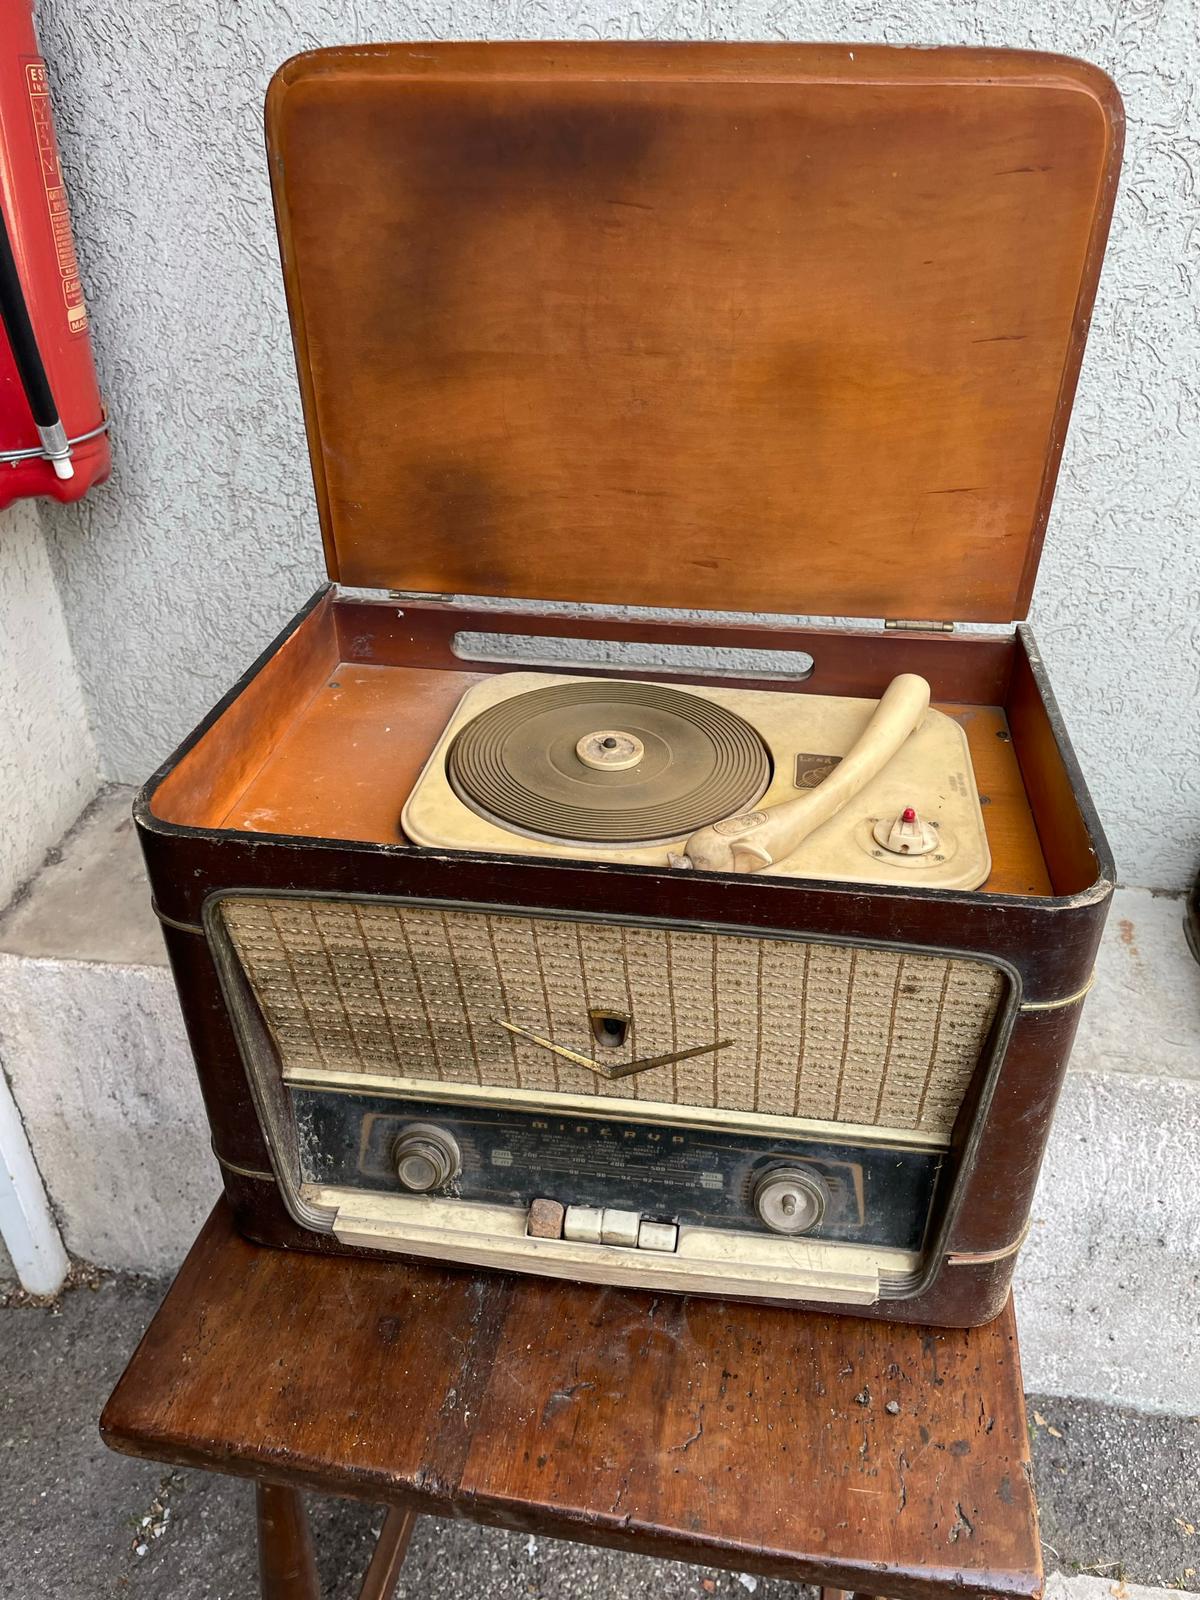 Radio with turntable to be serviced